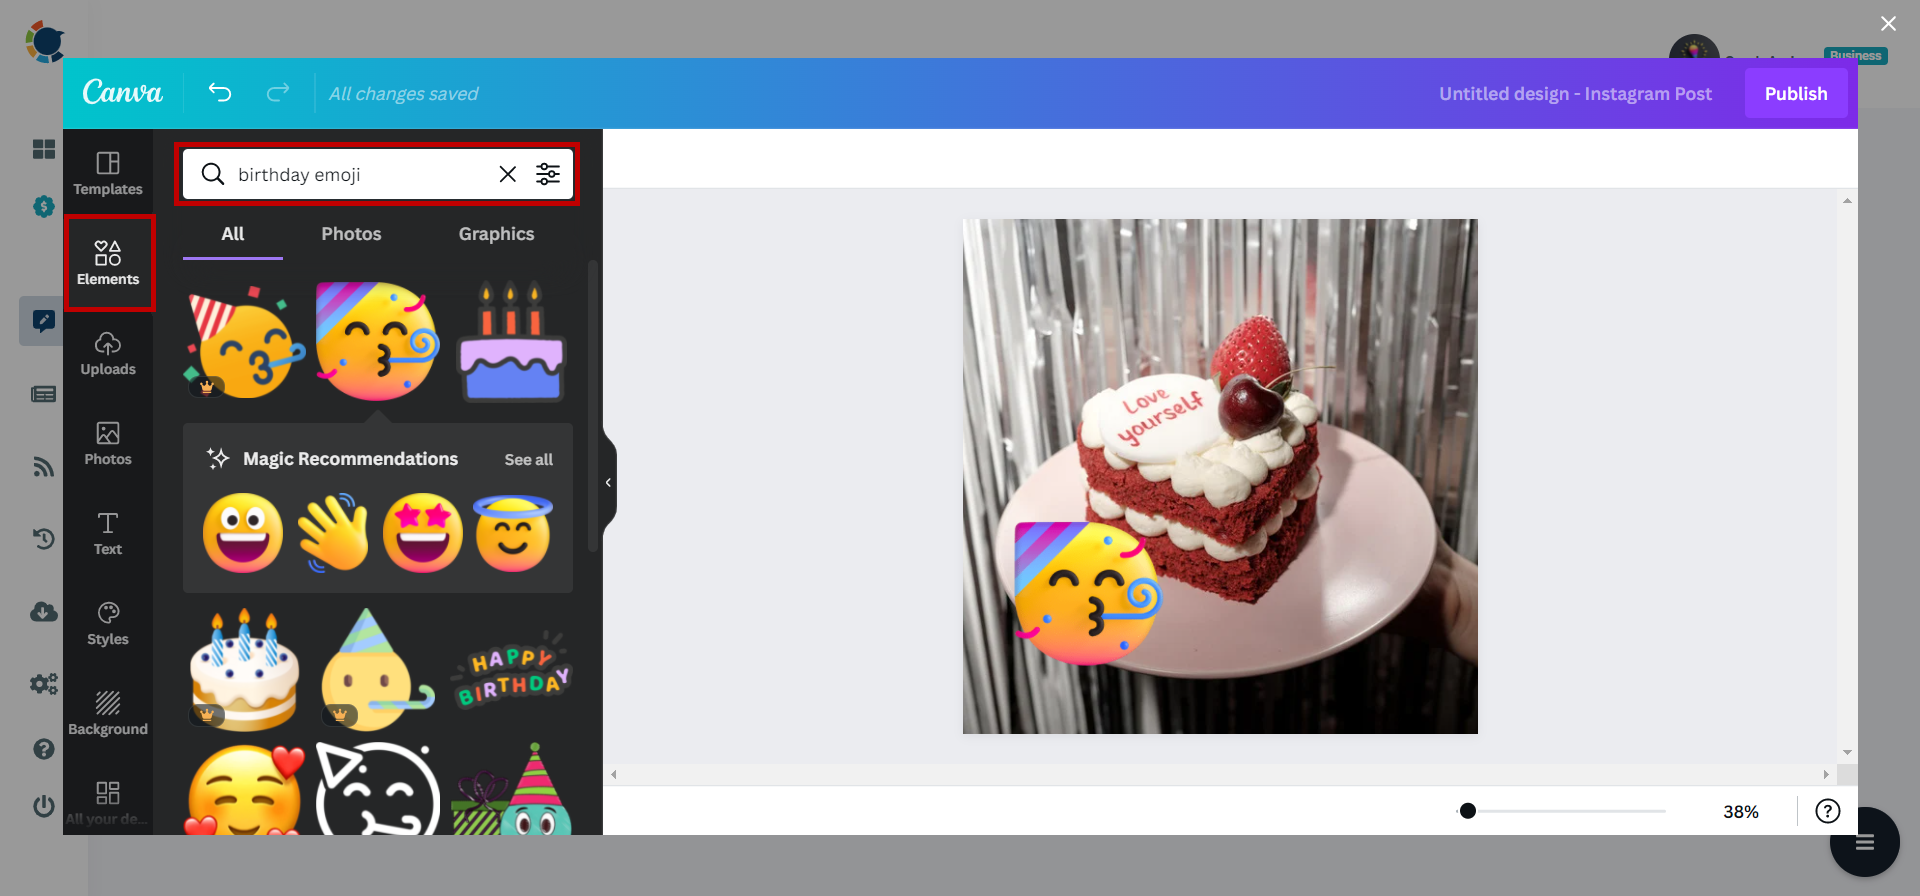 Add stickers to your social media posts